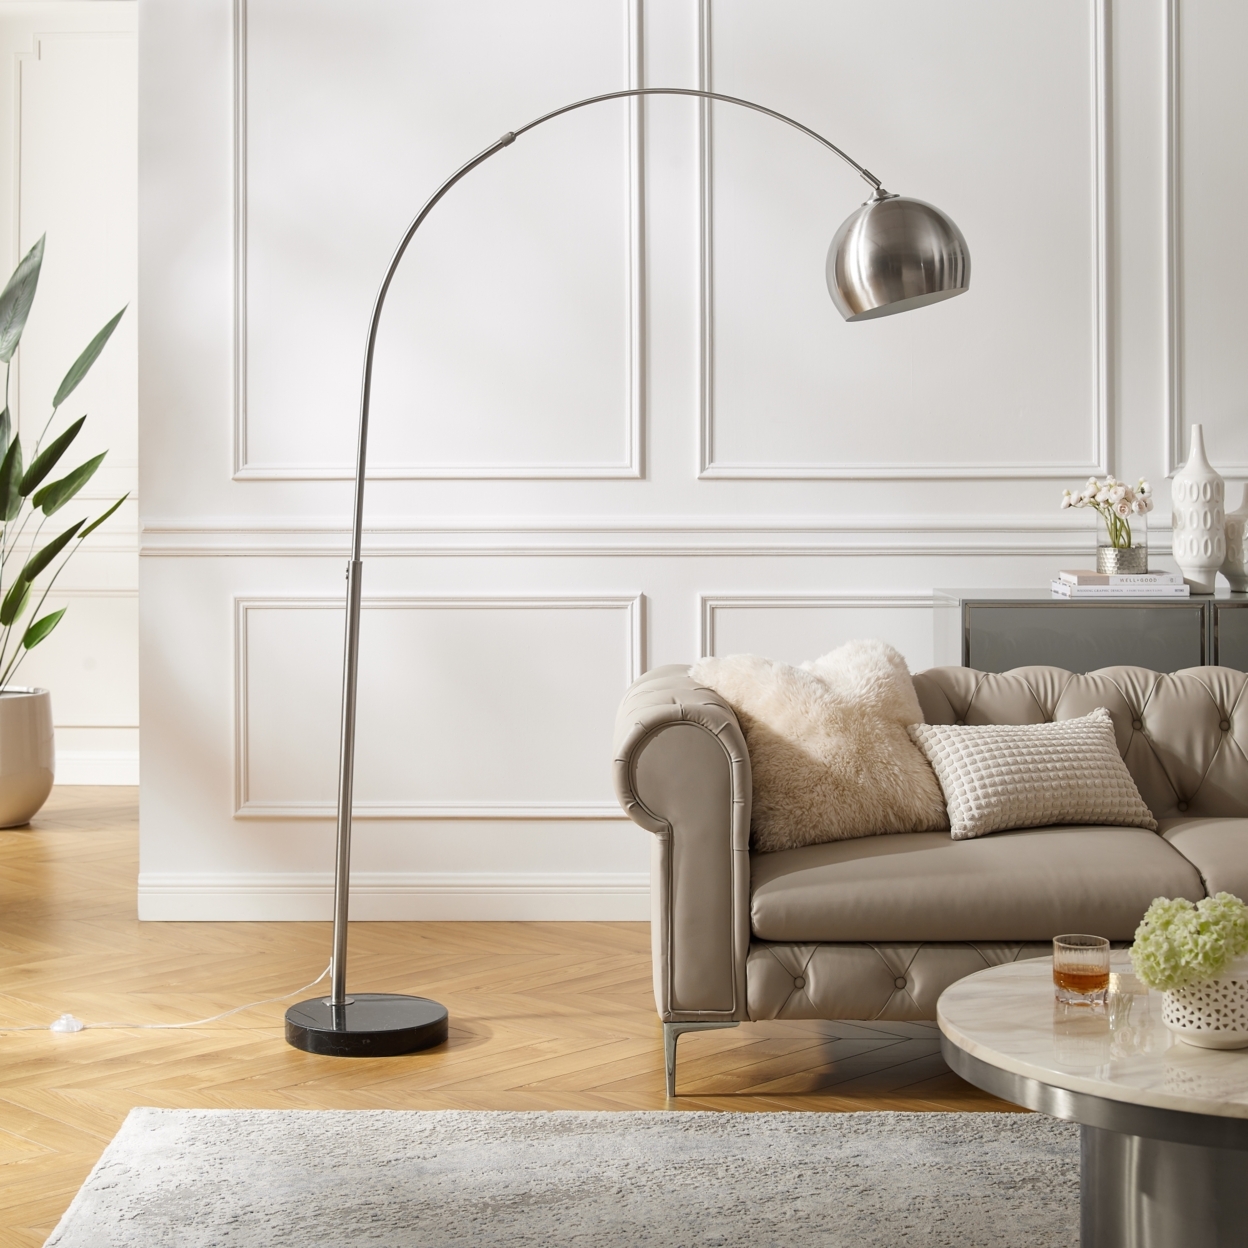 Maycie Floor Lamp - 6ft Power Cord, Marble Stone Base , Arched Sturdy Metal Frame With Adjustable Joints , Foot Switch - Stainless Steel